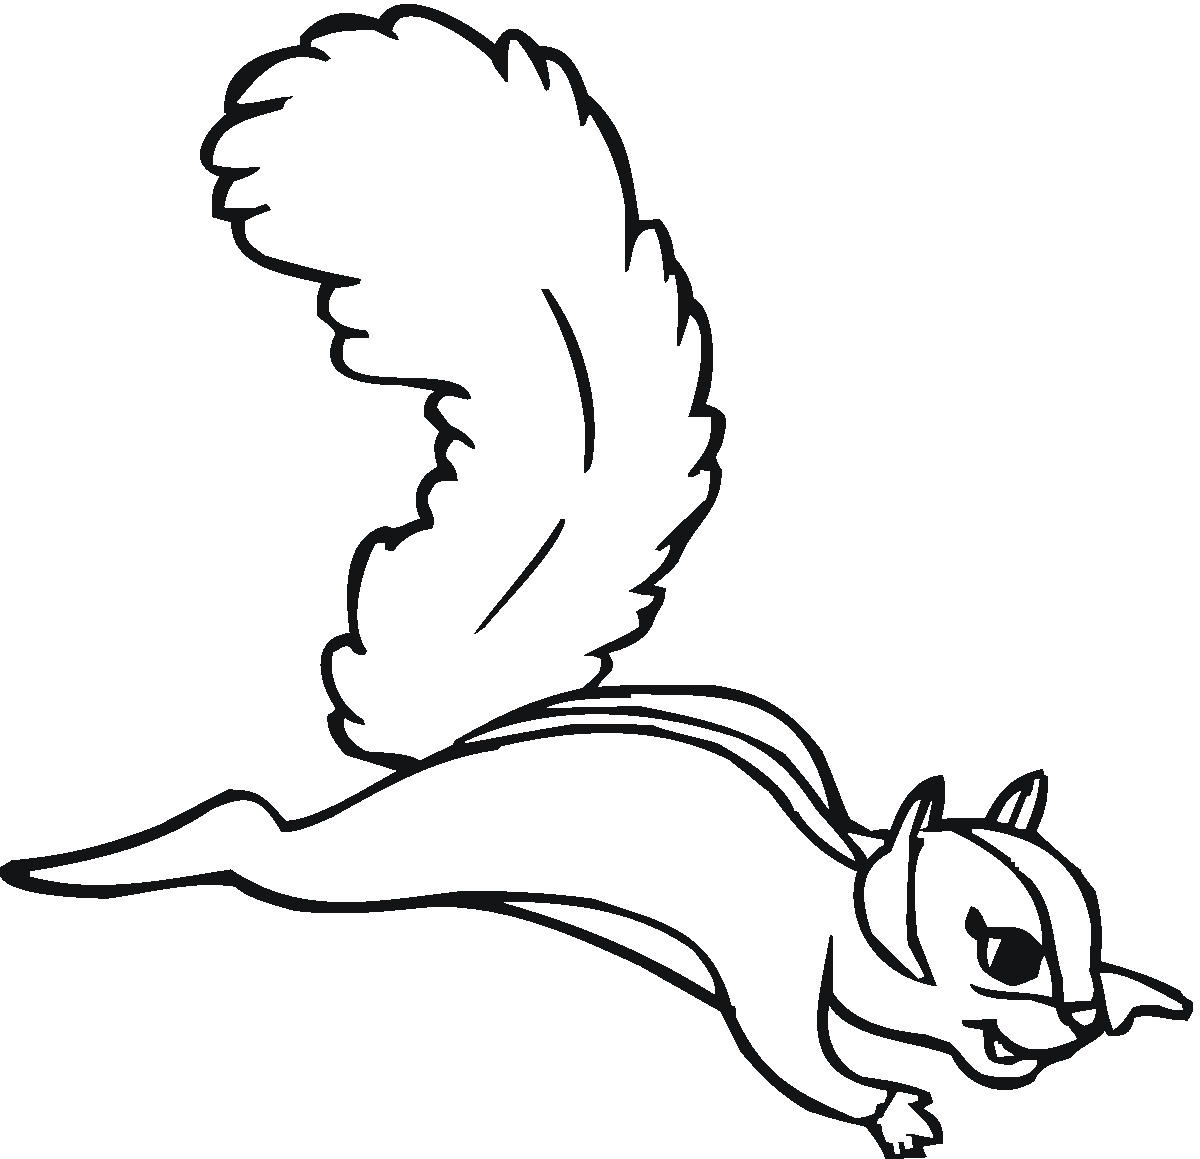 Inspirational Flying Squirrel Coloring Page | ViolasGallery.com